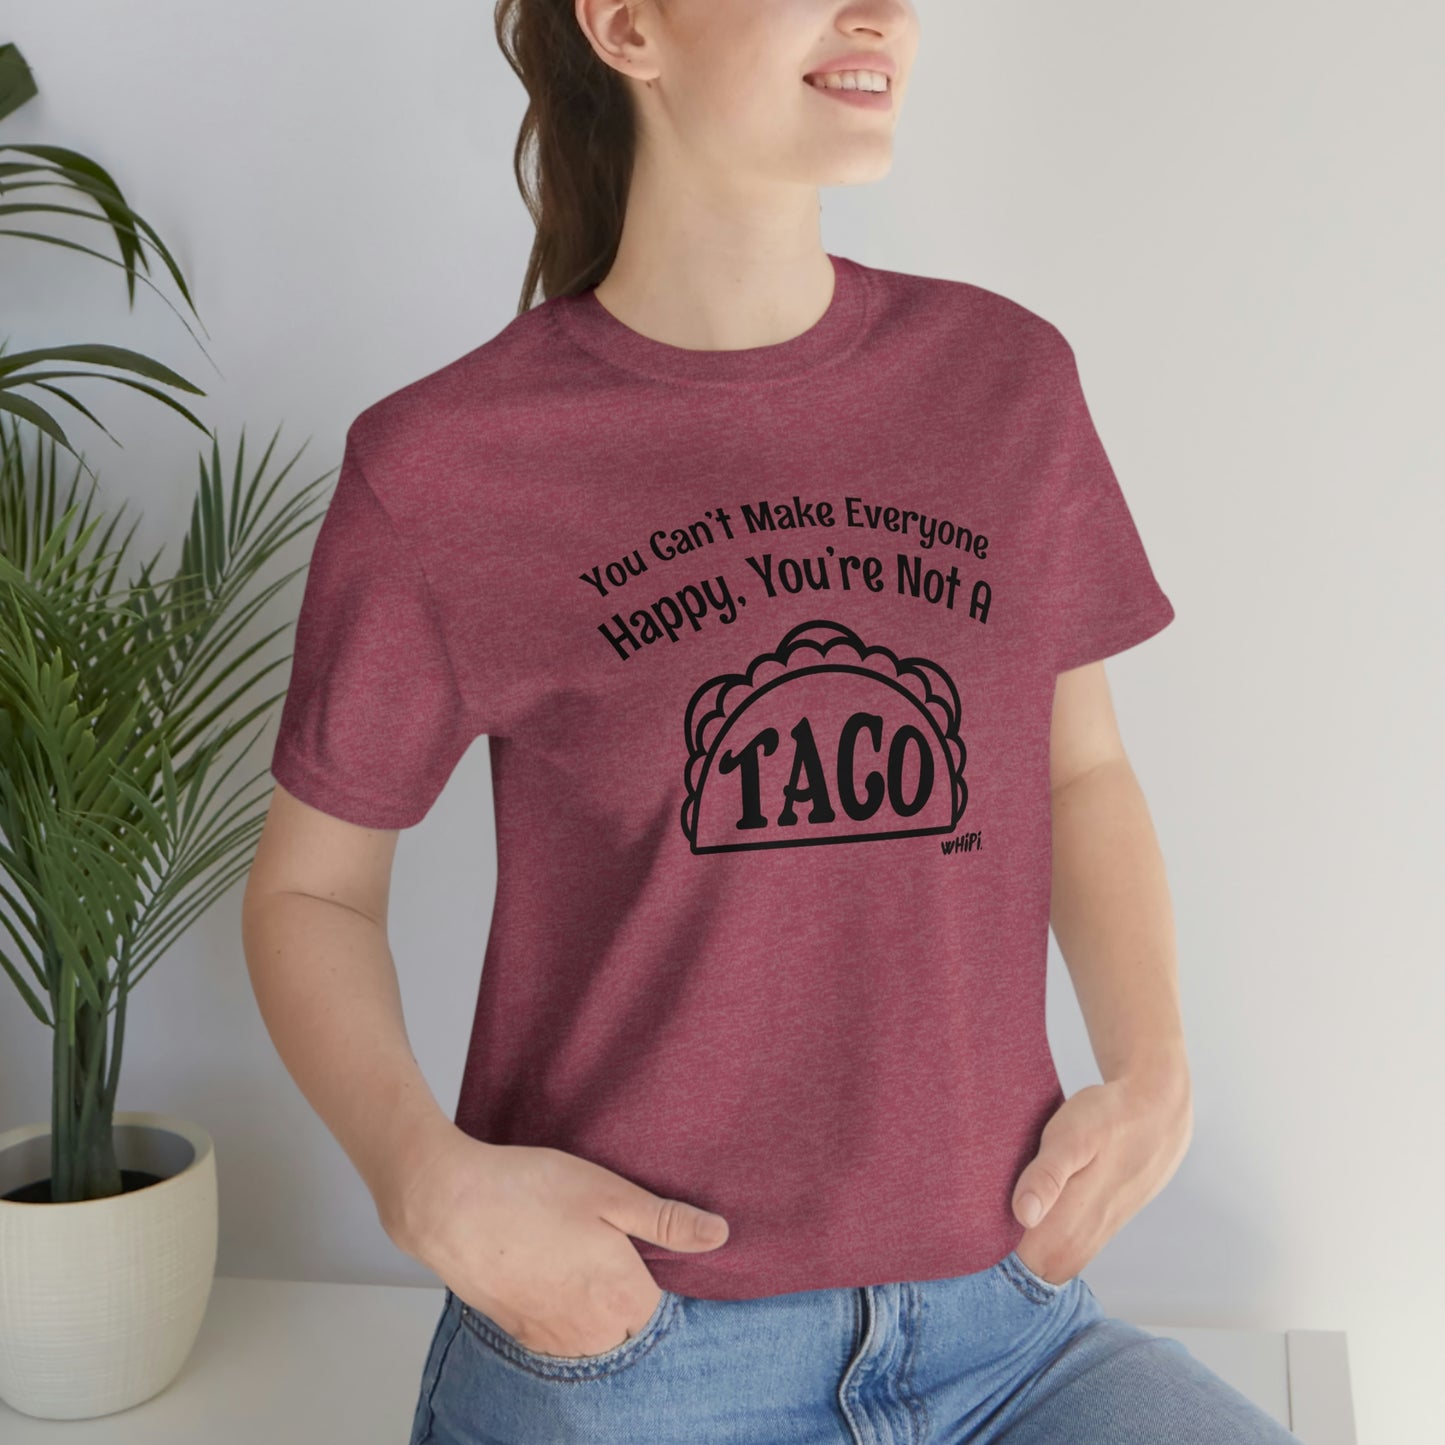 You're Not a Taco